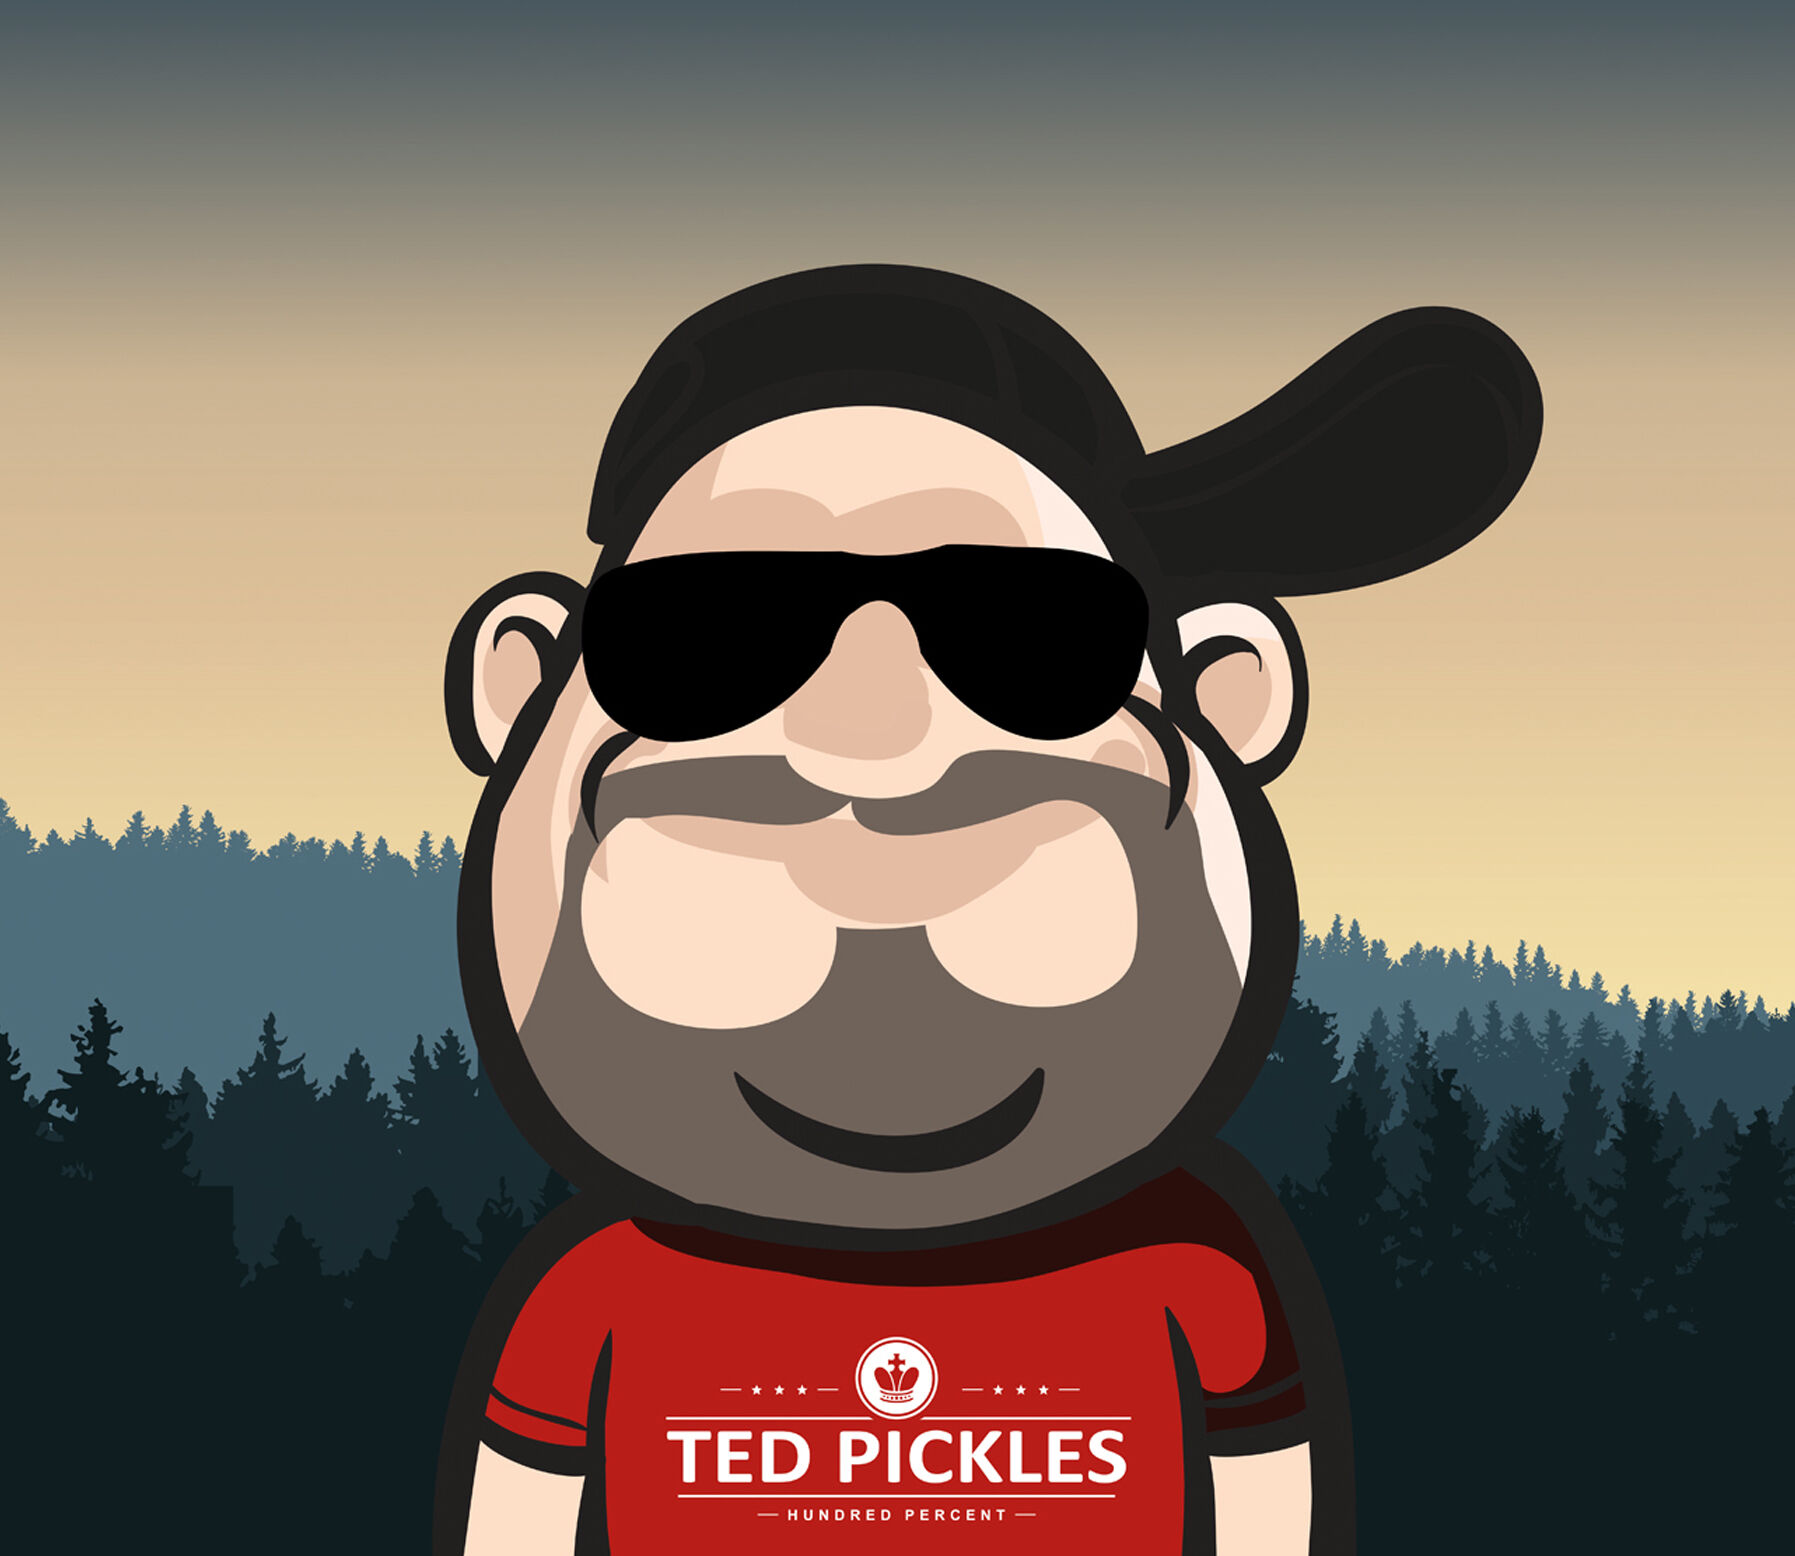 Ted Pickles